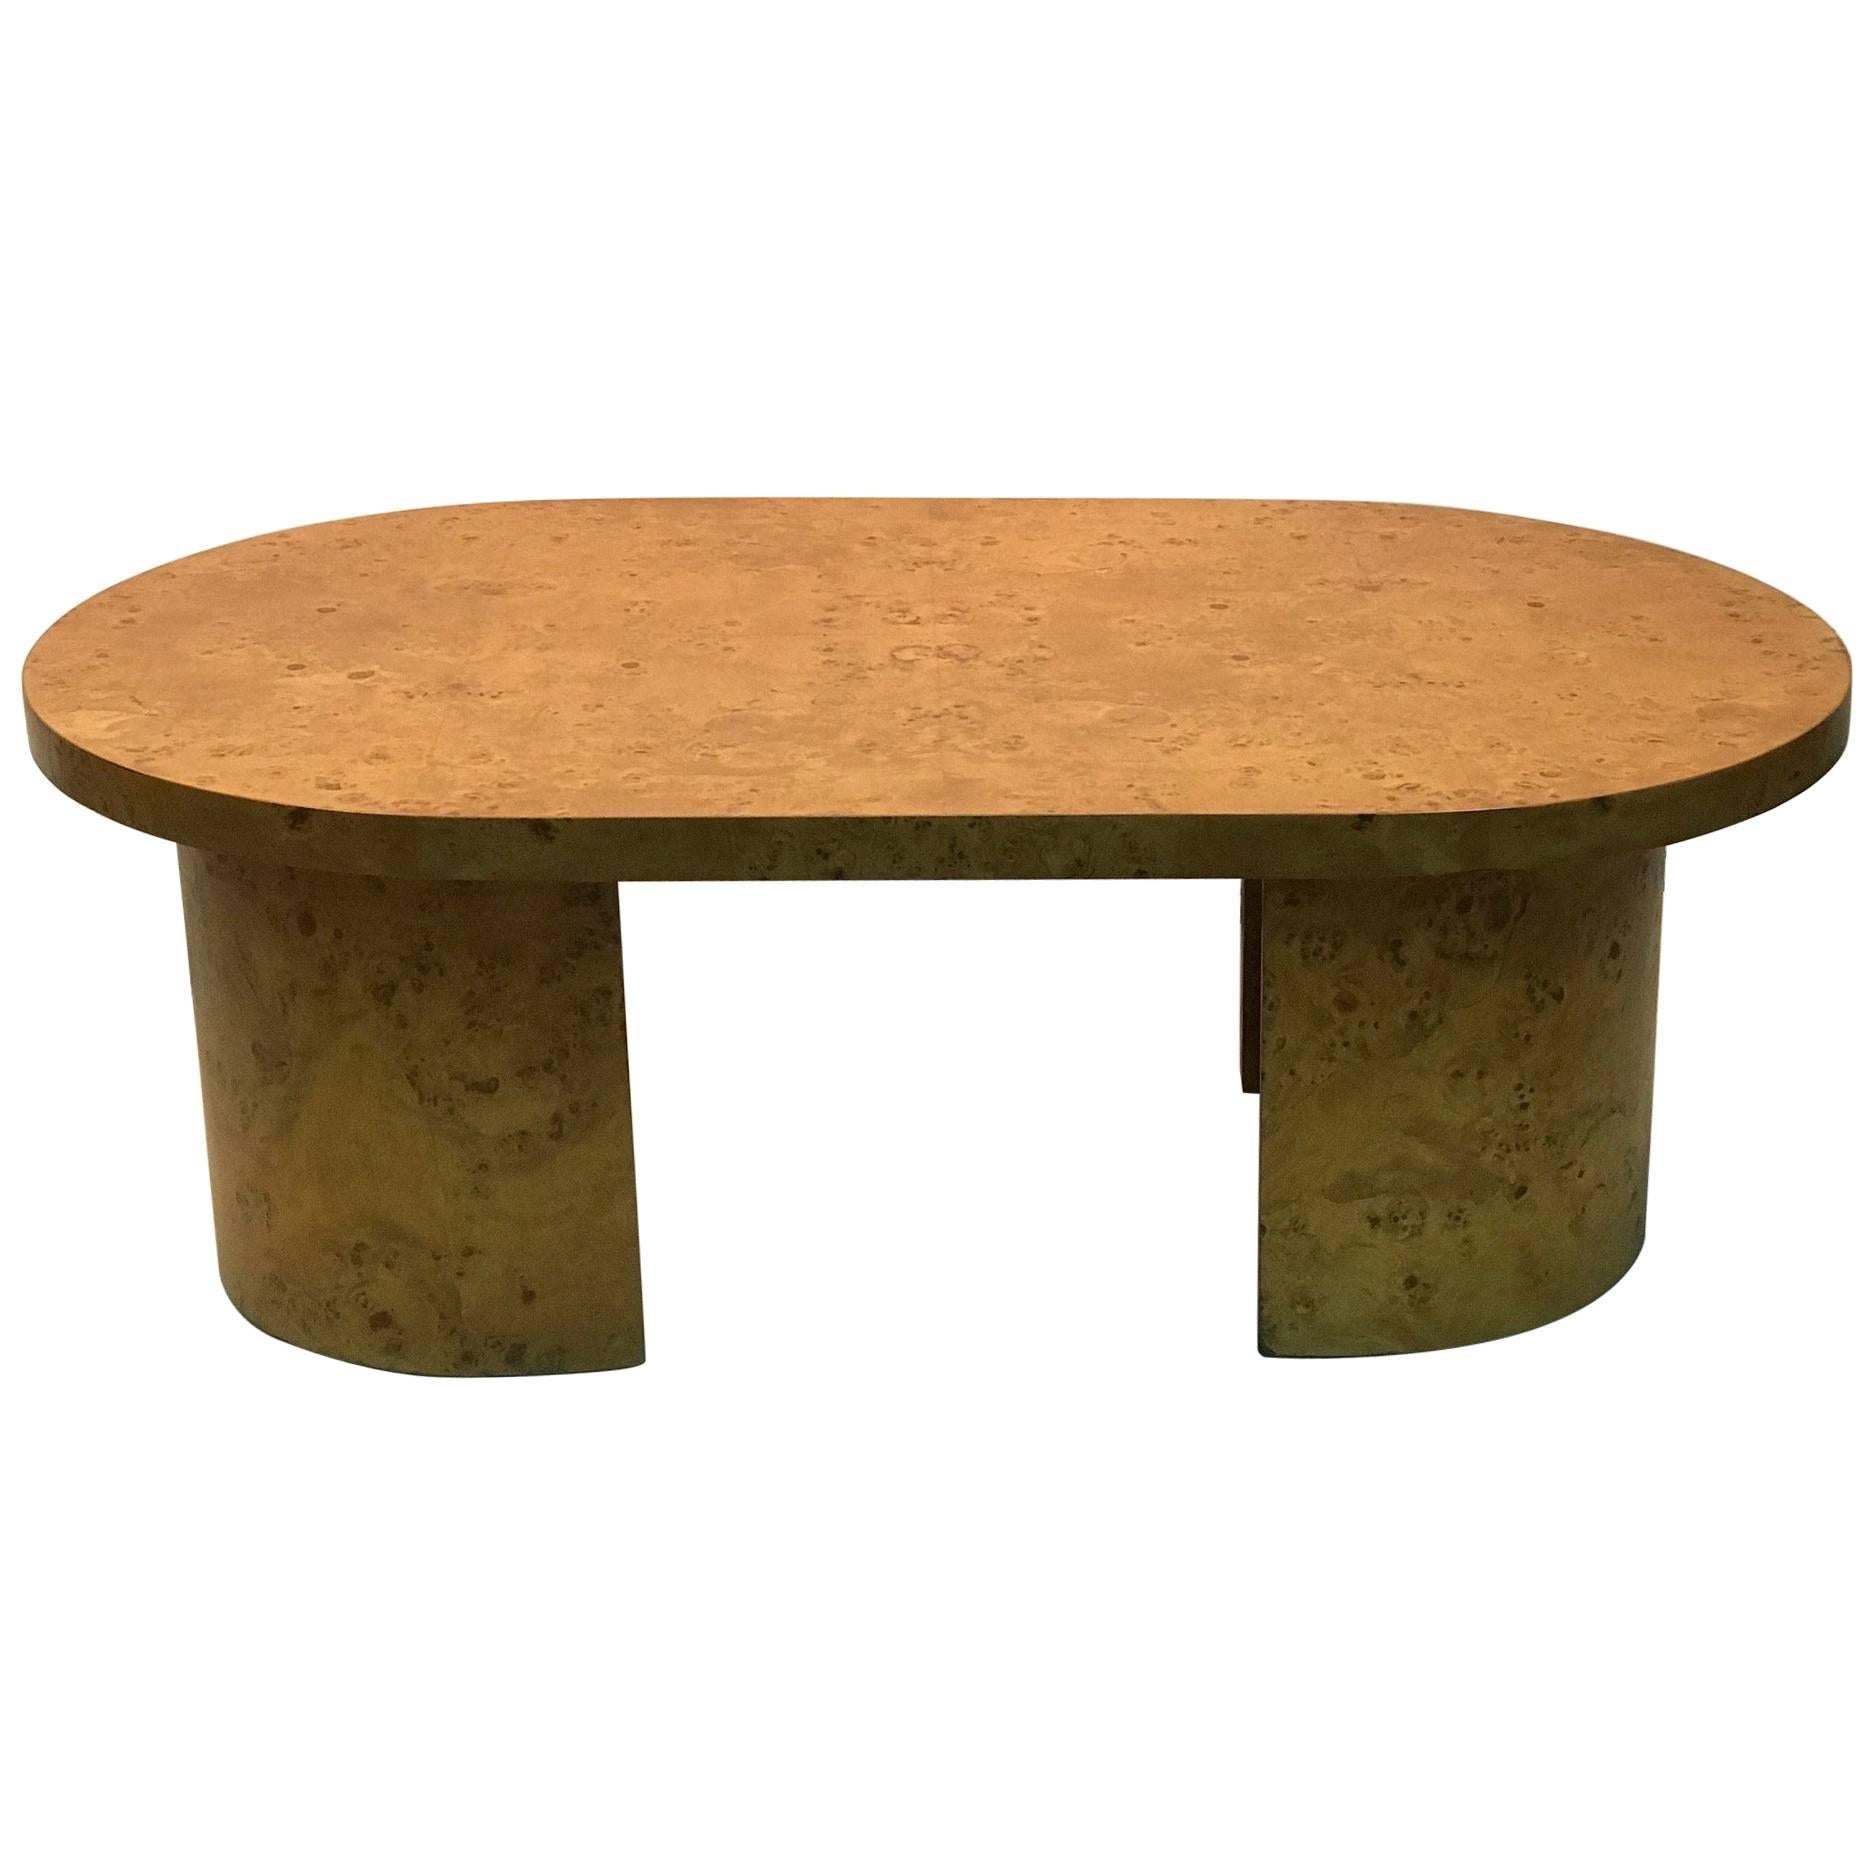 Burled Elm Wood Coffee Table Oval For Sale